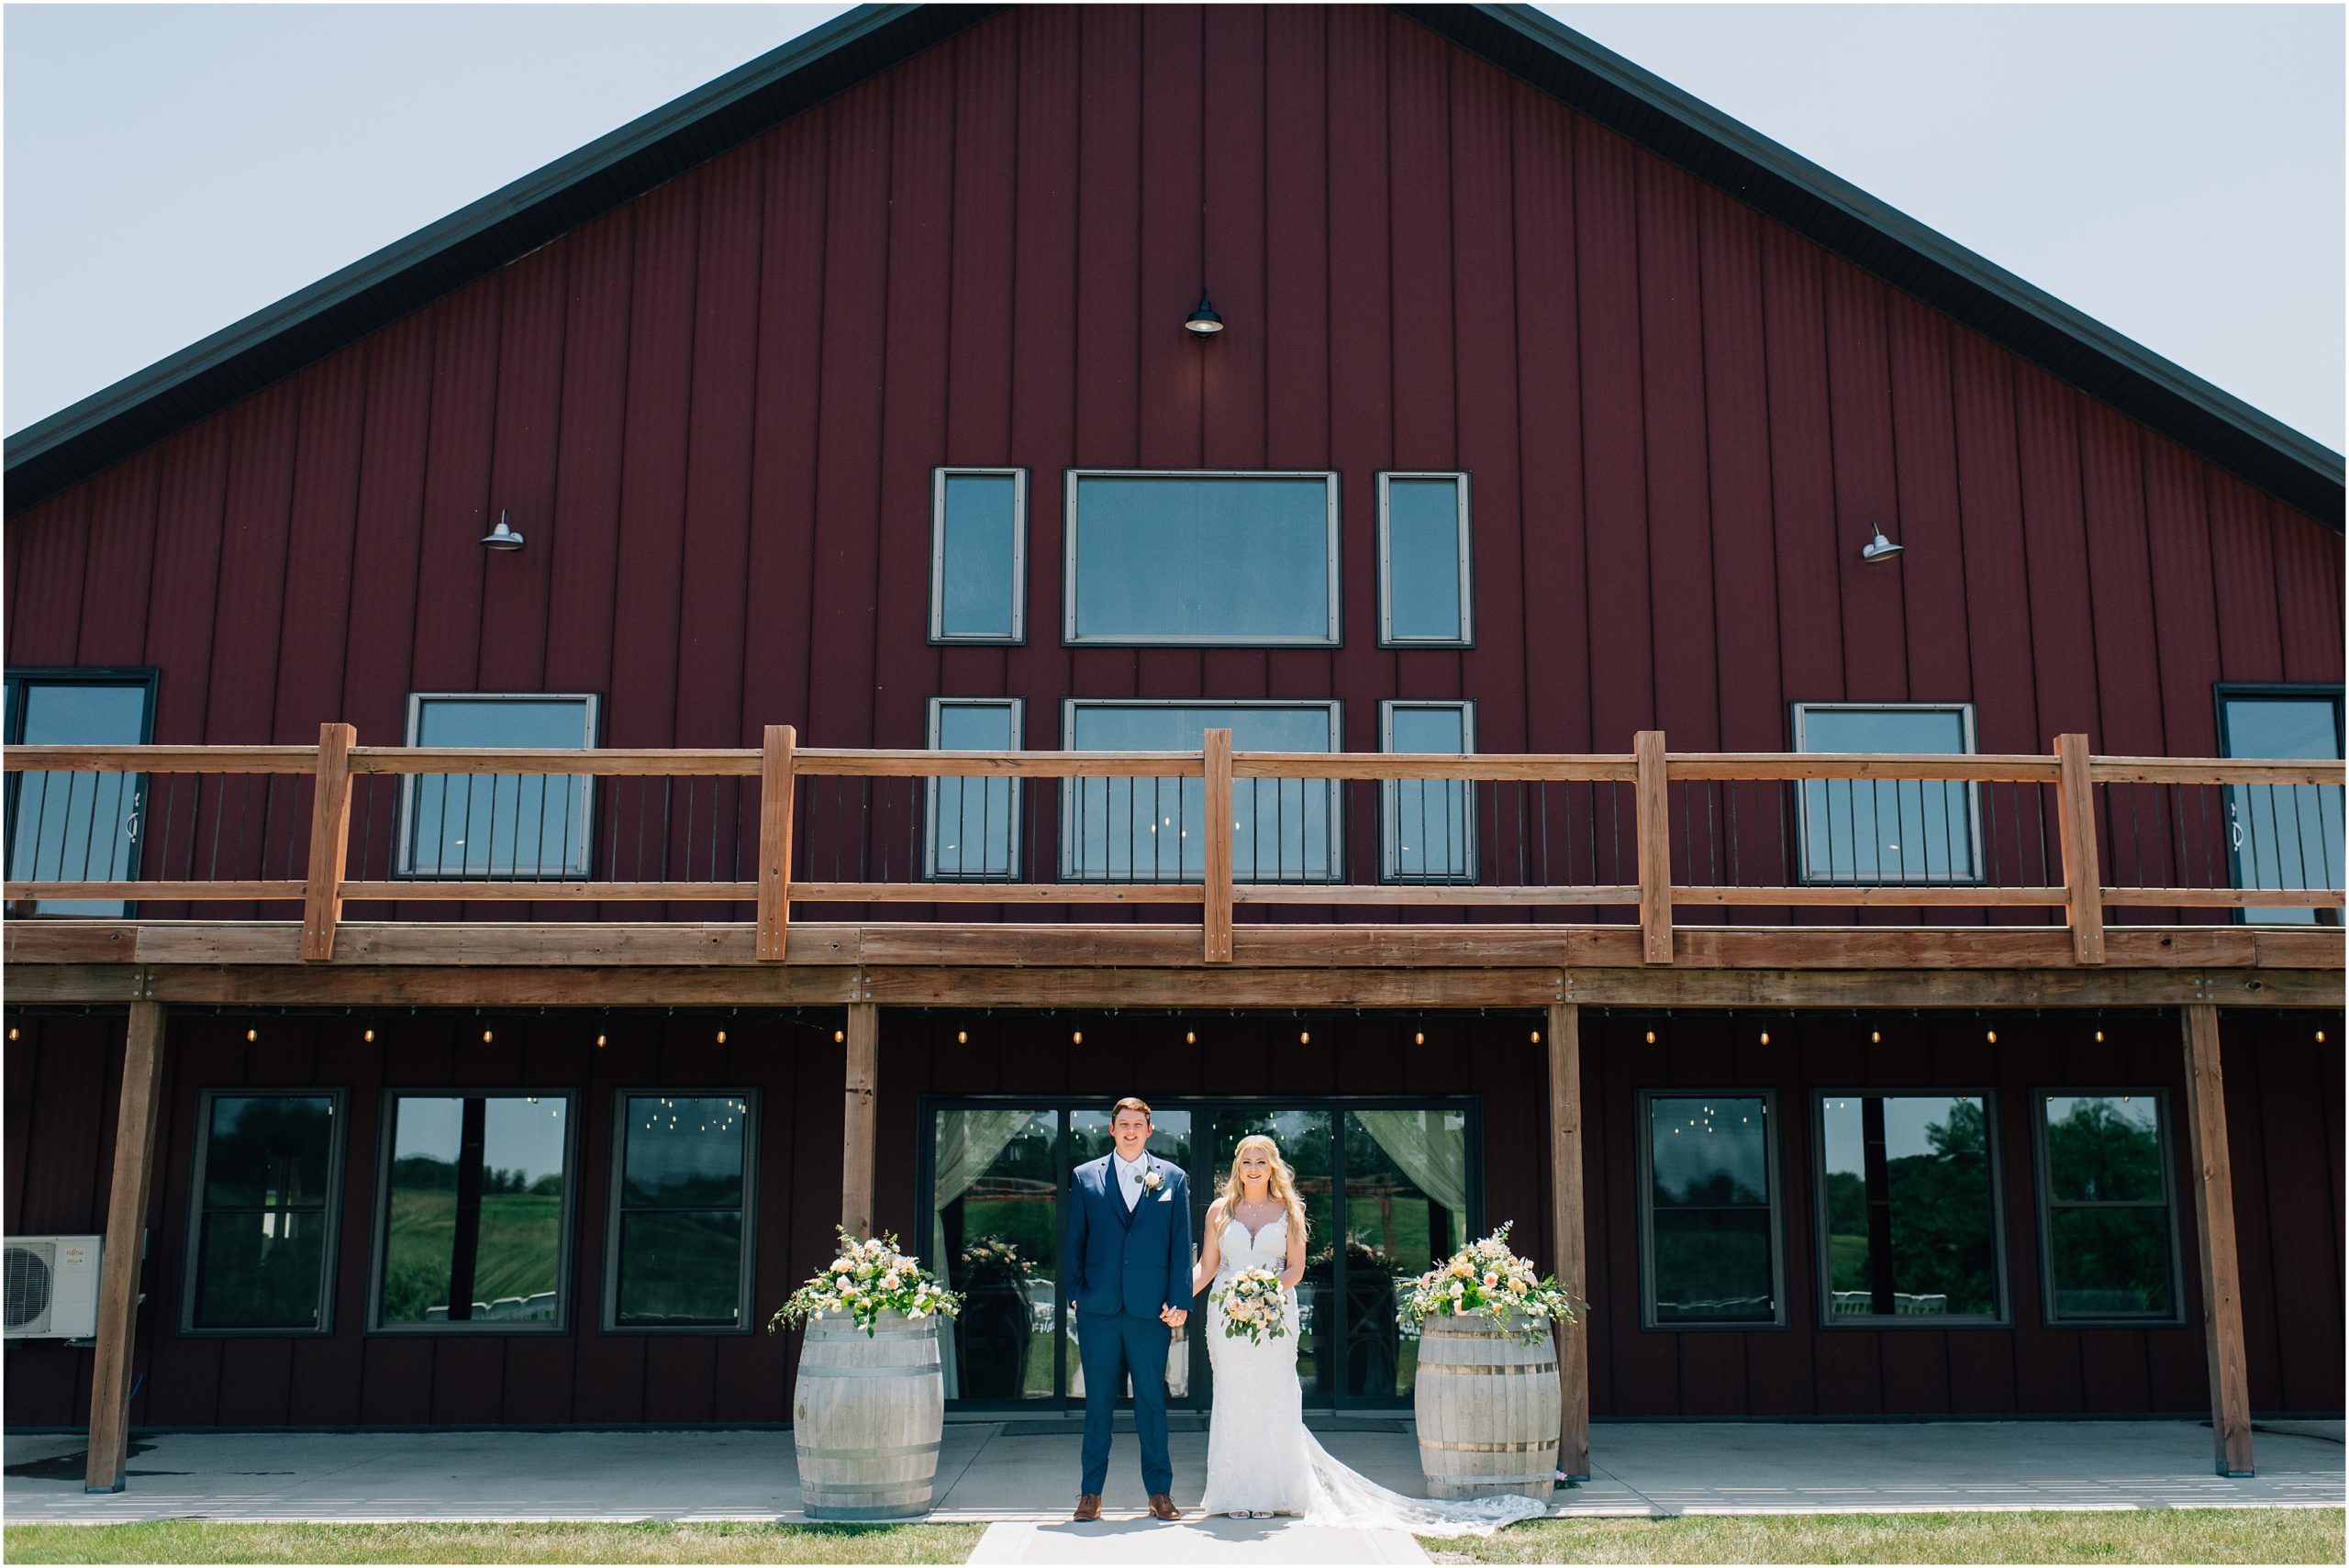 Bride and Groom stand hand in hand in front of the red barn venue, Carper Vineyard and Winery, a wedding venue near des moines. Photo by Anna Brace, who specializes in Omaha Wedding Photography